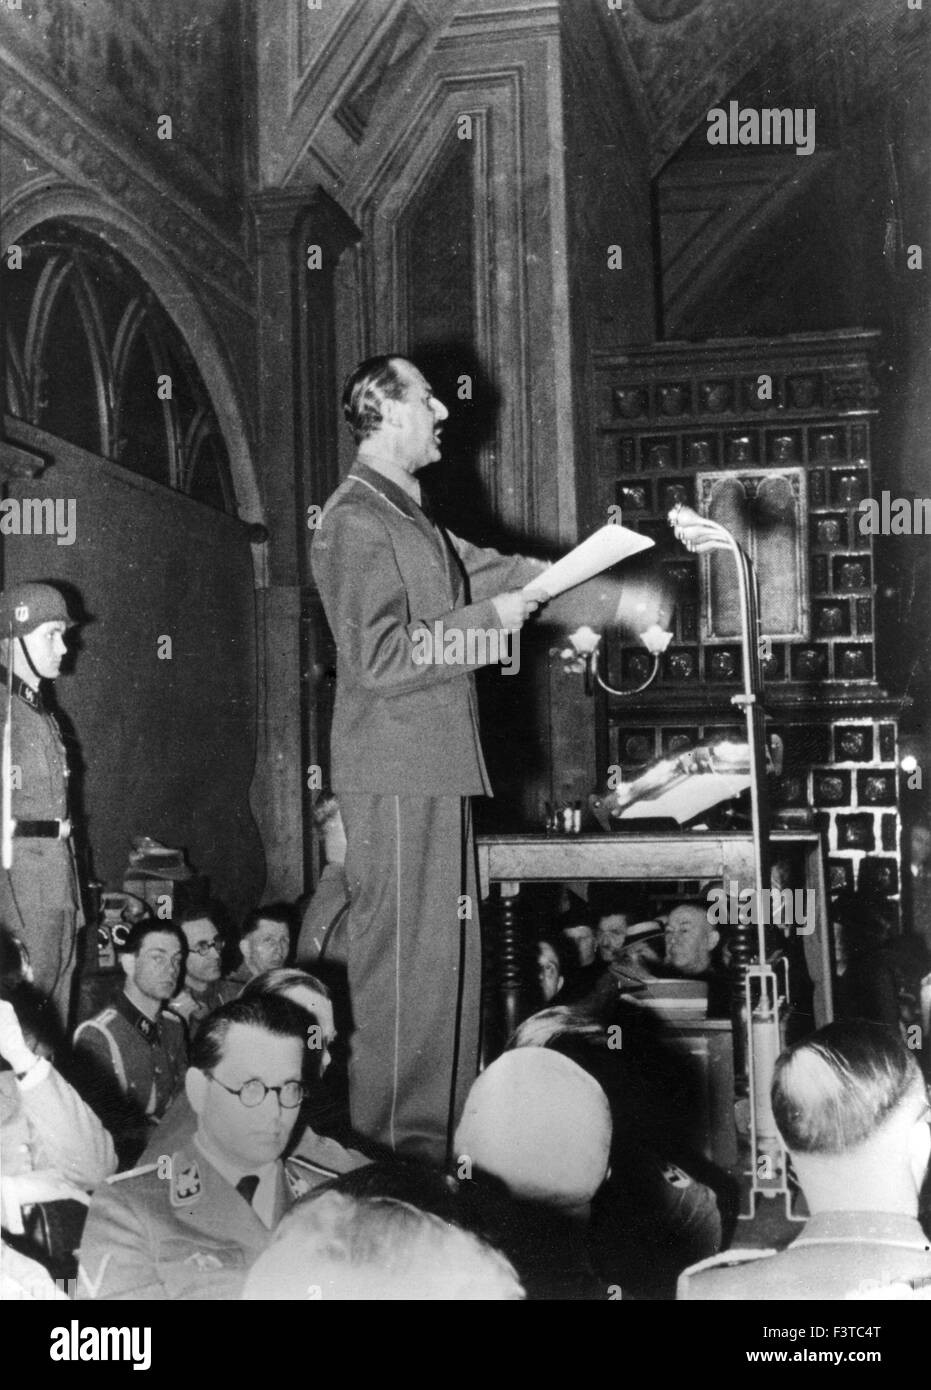 HERMANN ESSER (1900-1981) Nazi Secretary of State celebrating the 23rd anniversary of the founding of the National Socialist Party (NAZIs) in the Munich Hofbrauhaus 27 February 1943. The original captions reads 'Esser read the proclamation of the Fuehrer, who, for military reasons, was unable to be present'. Stock Photo